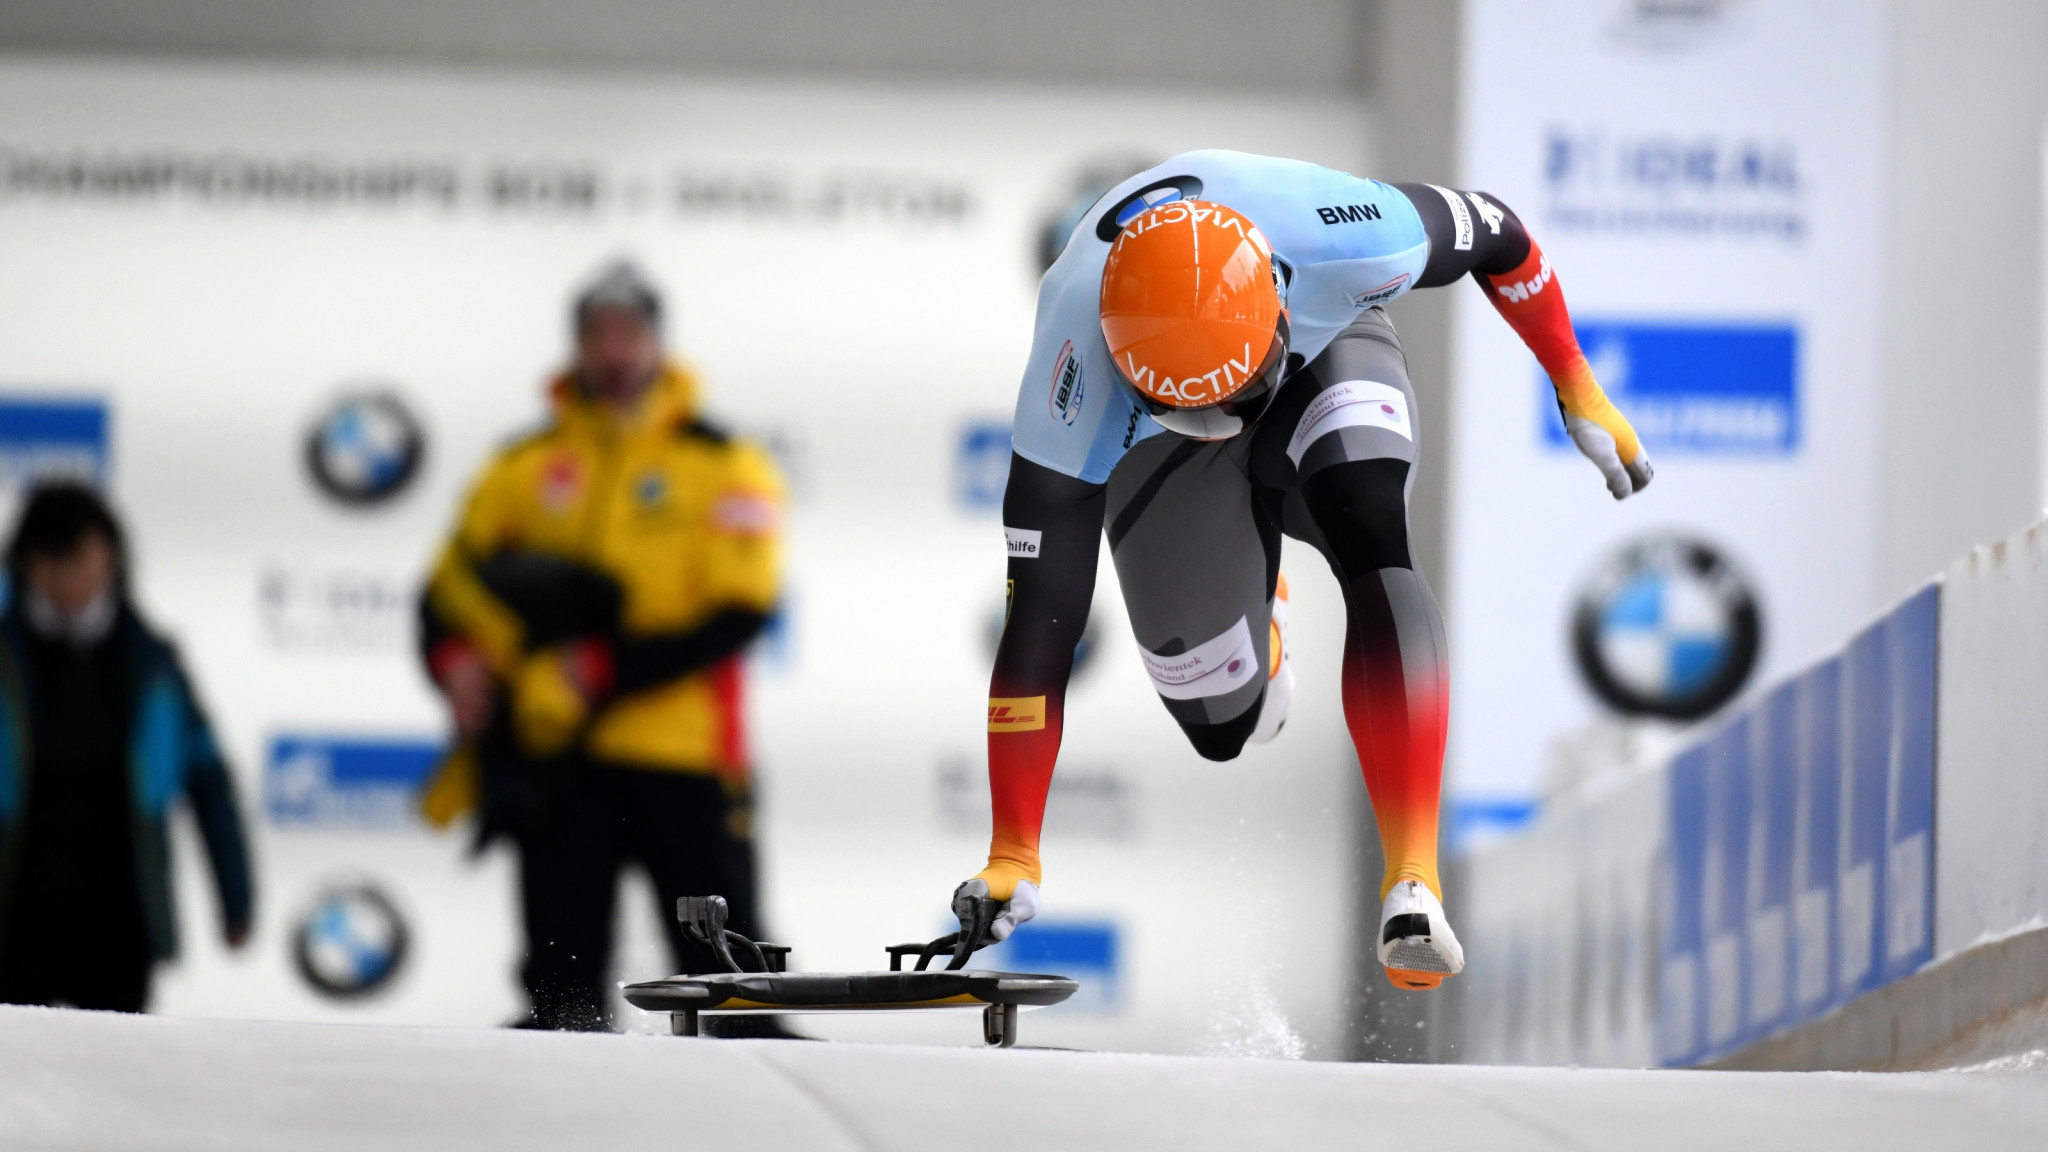 Germany's Christopher Grotheer leads the men's skeleton standings at the IBSF World Championships in Altenberg ©IBSF/Viesturs Lacis